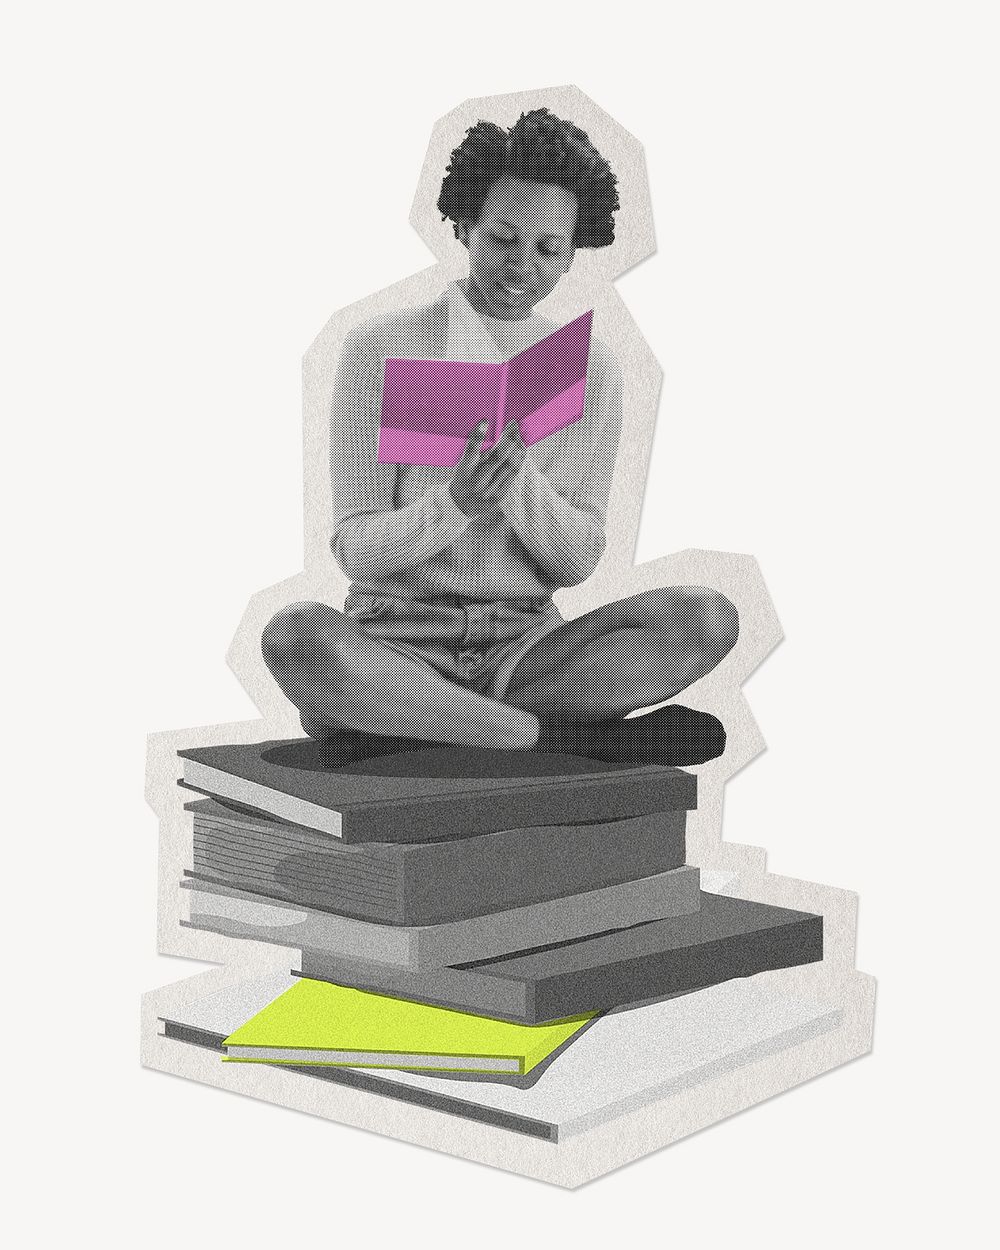 Woman reading book,paper cut isolated design